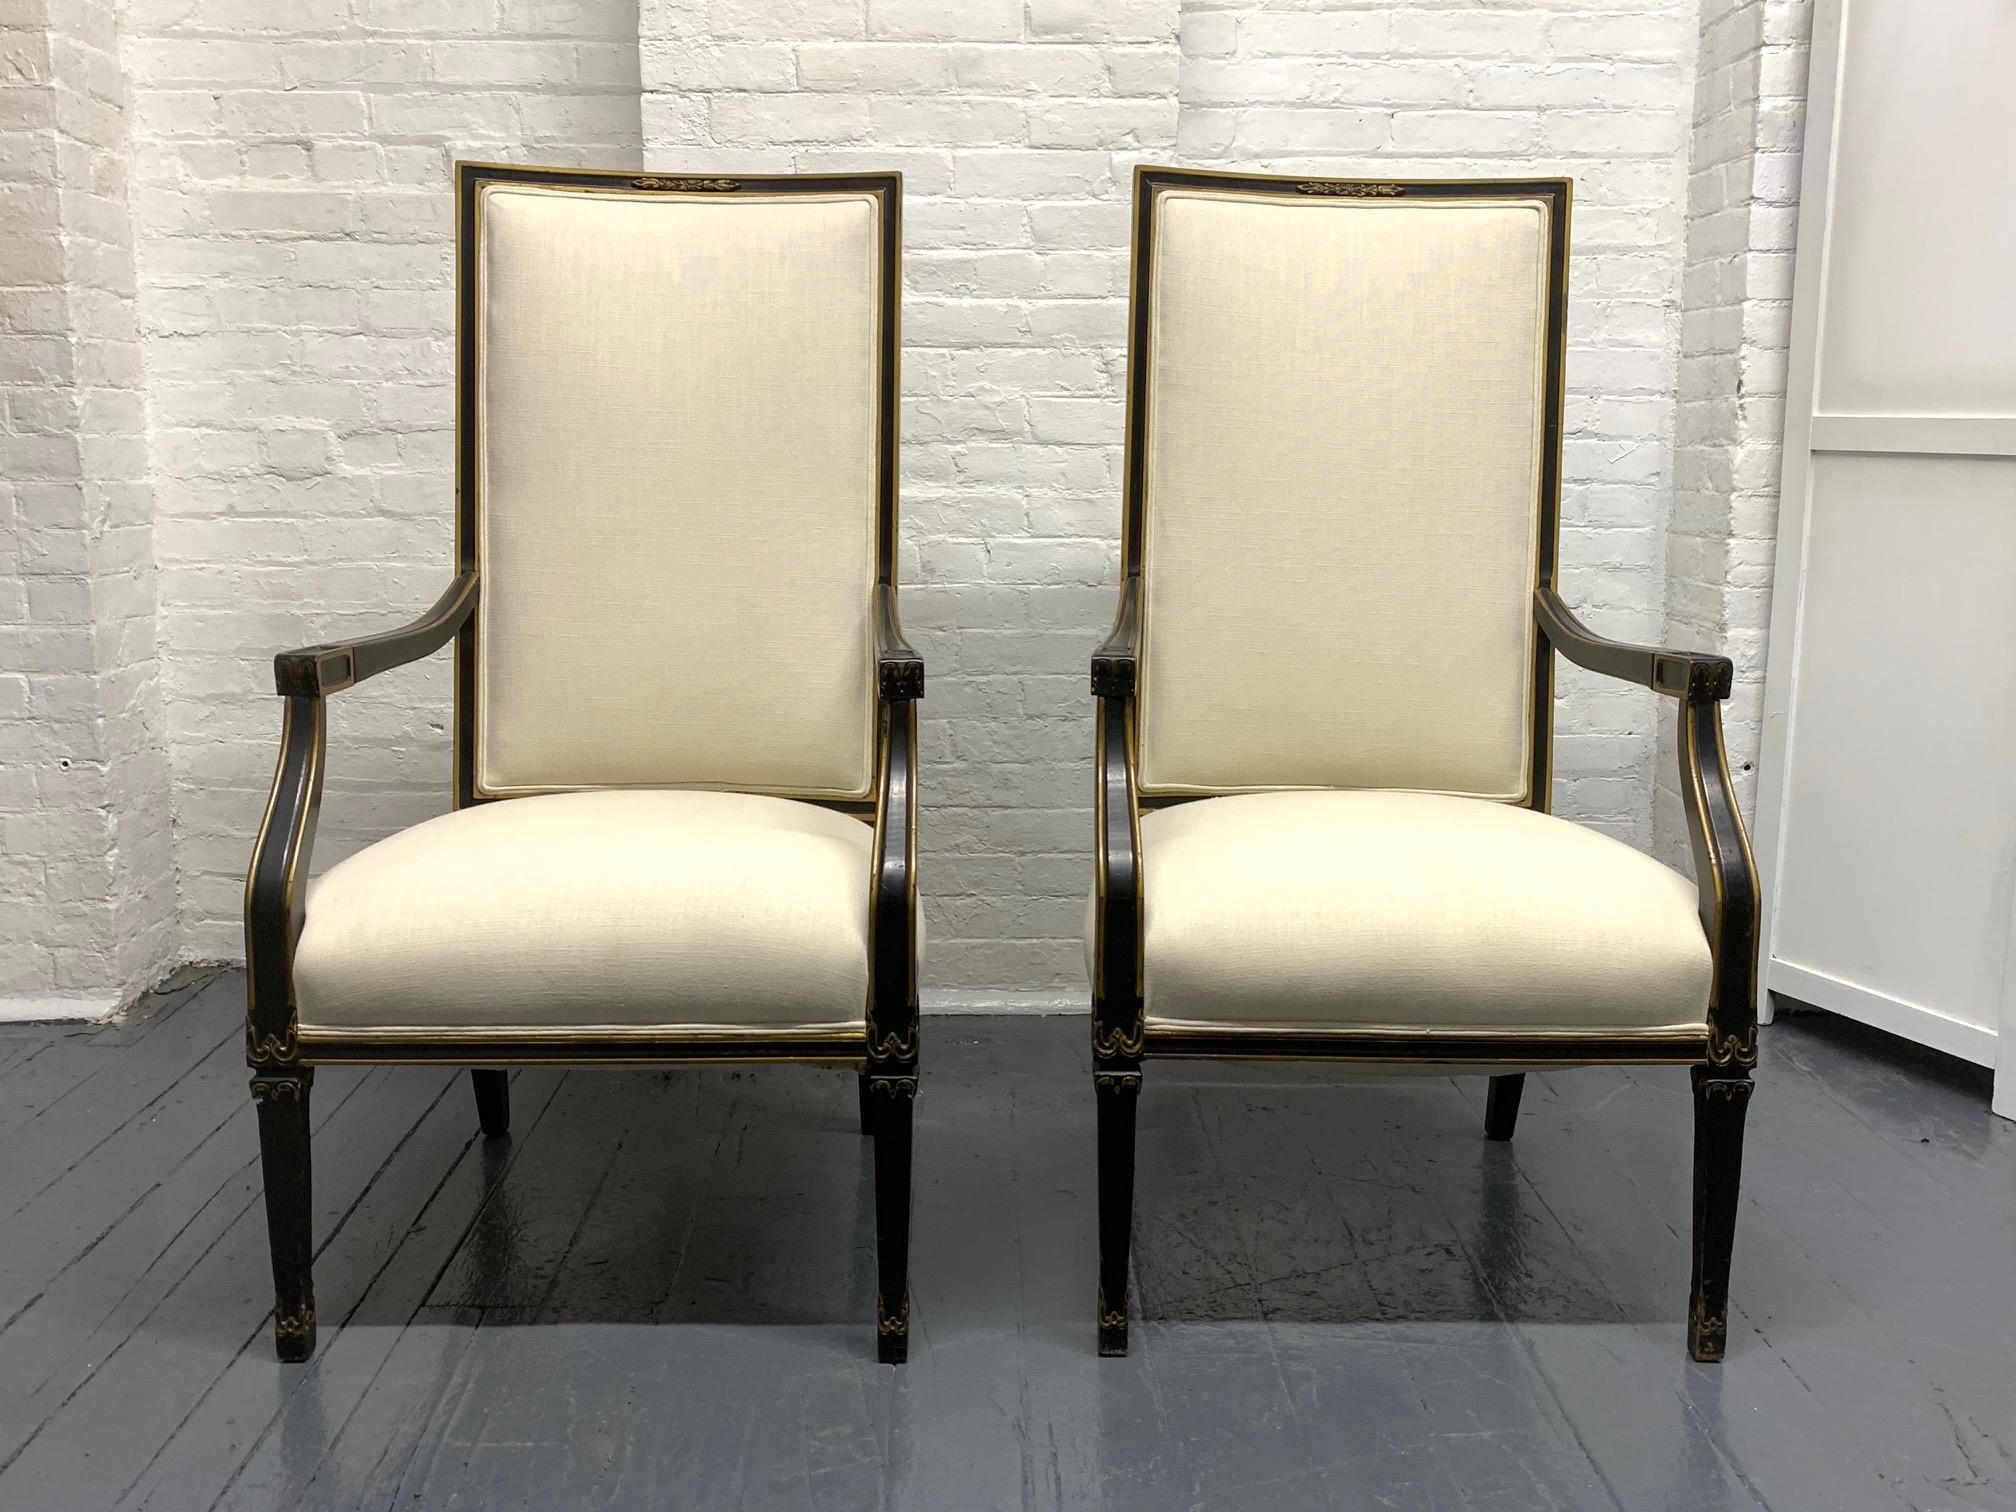 Pair of French black and gold trim side chairs. Upholstered in a linen blend fabric. Hollywood Regency style.